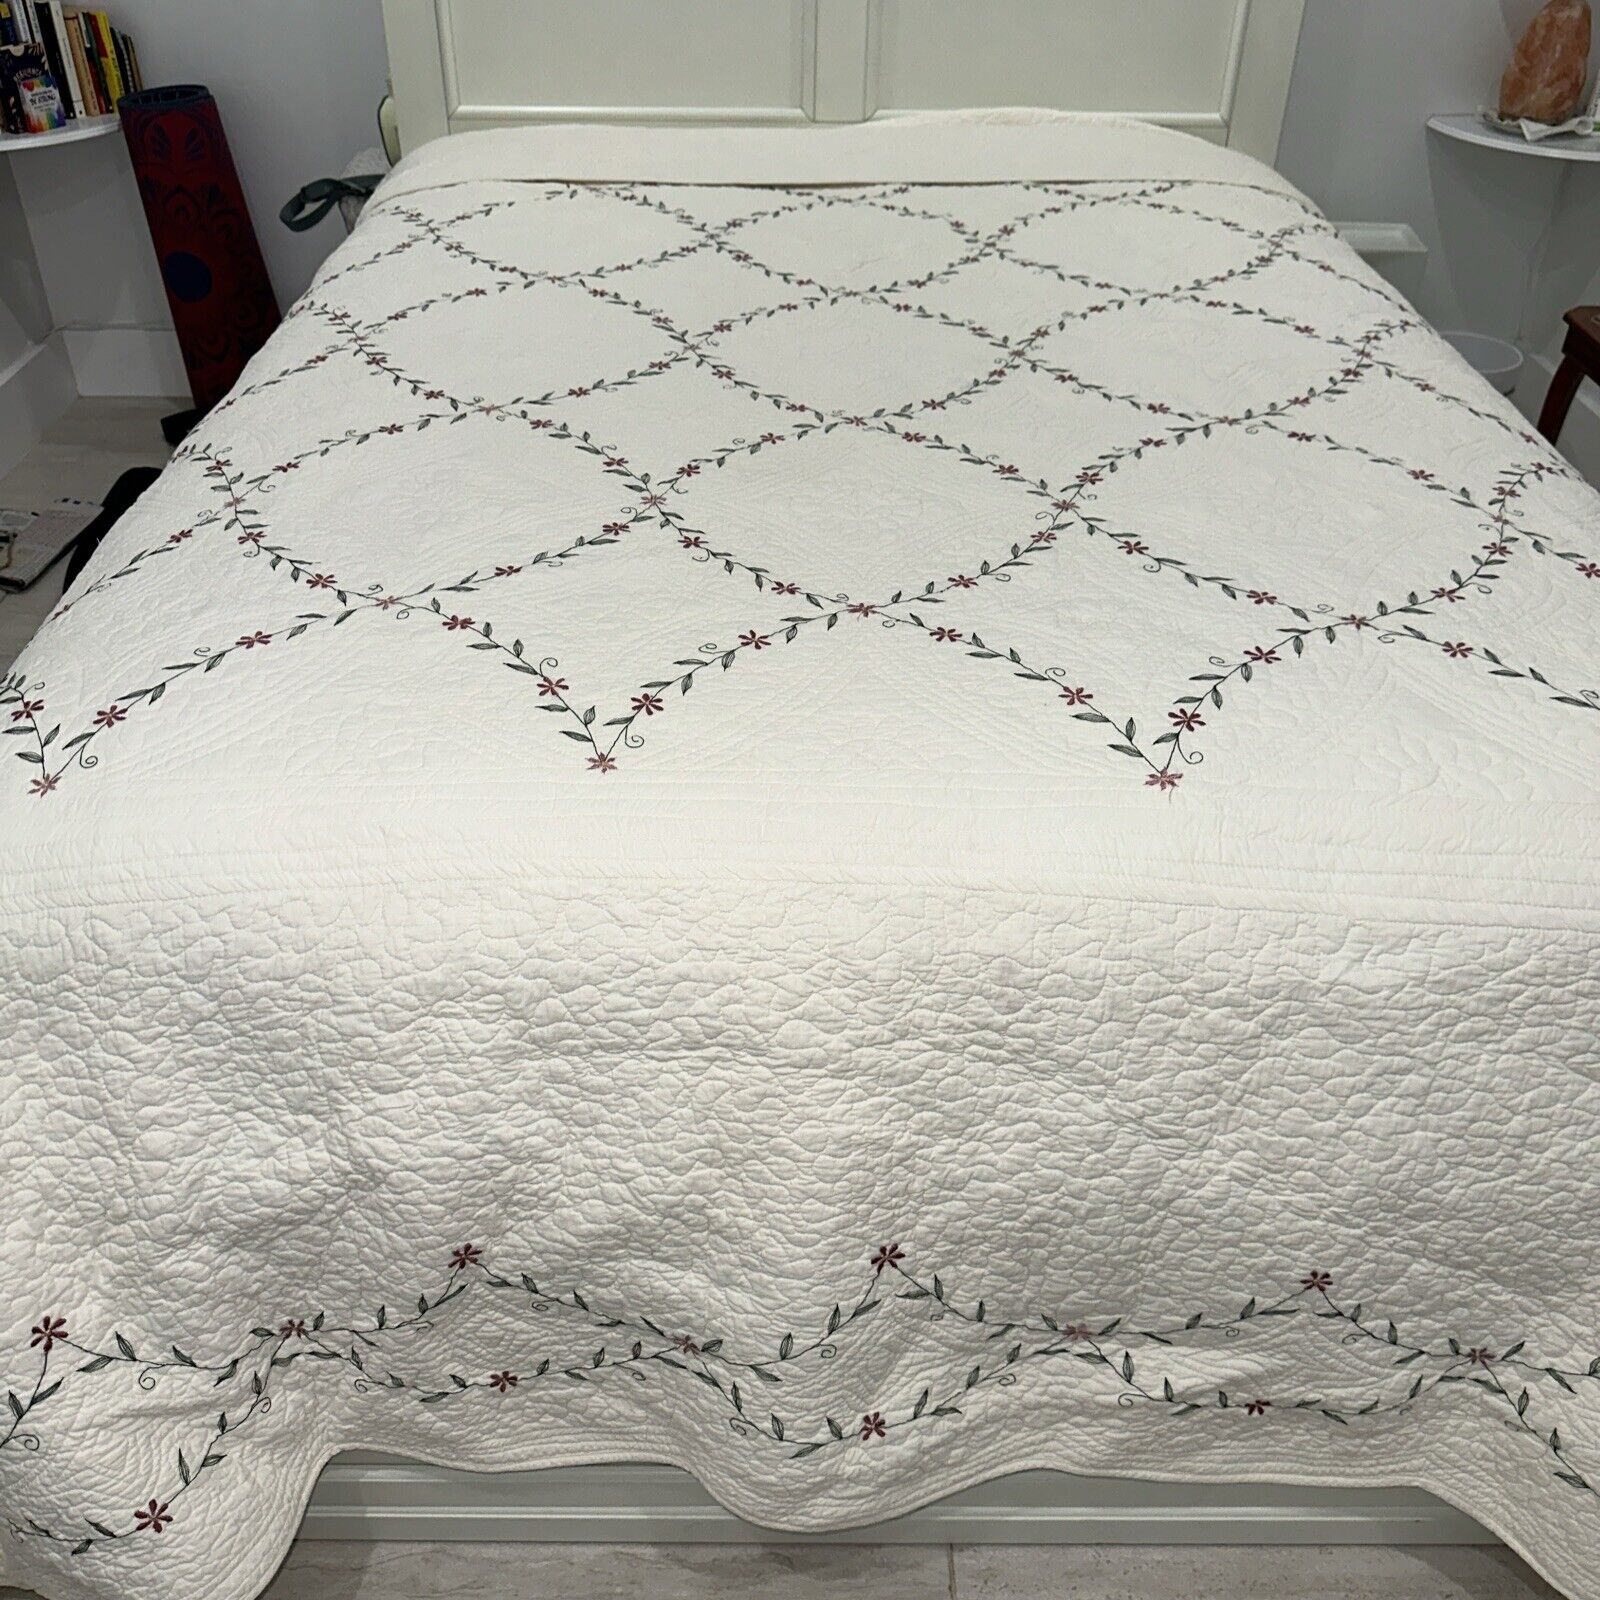 Vintage King/Queen Embroidered Quilt 104”x118”